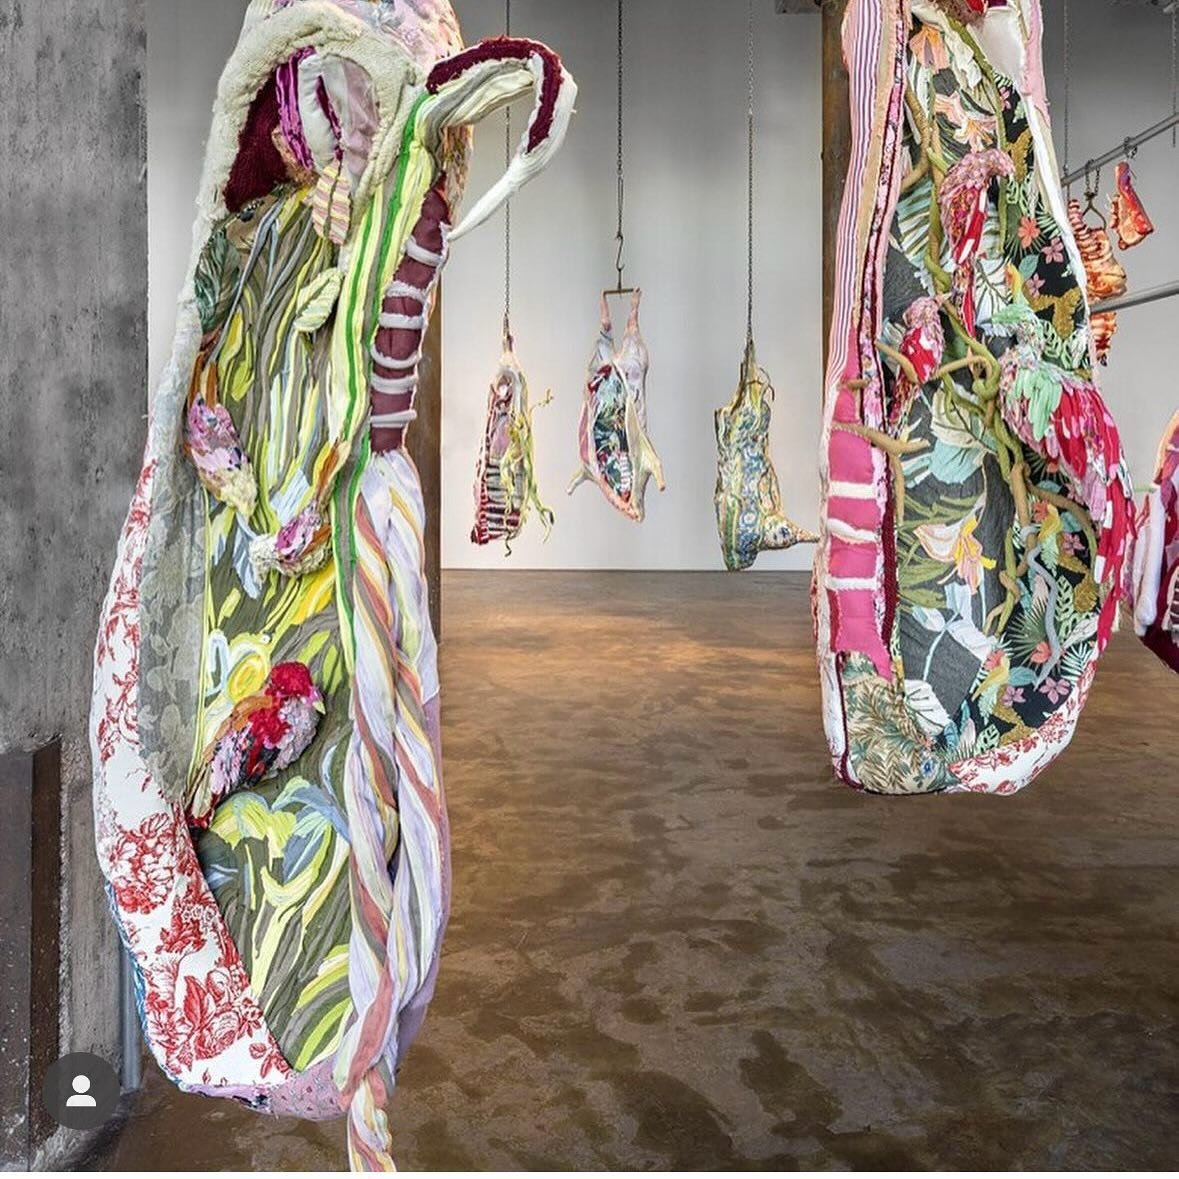 Argentinian-American artist Tamara Kostianovsky uses discarded clothing as well as other recycled materials in her irreverent, gorgeous, made you look sculpture. Challenging consumer culture, the environment and normalized violence, Kostianovsky crea